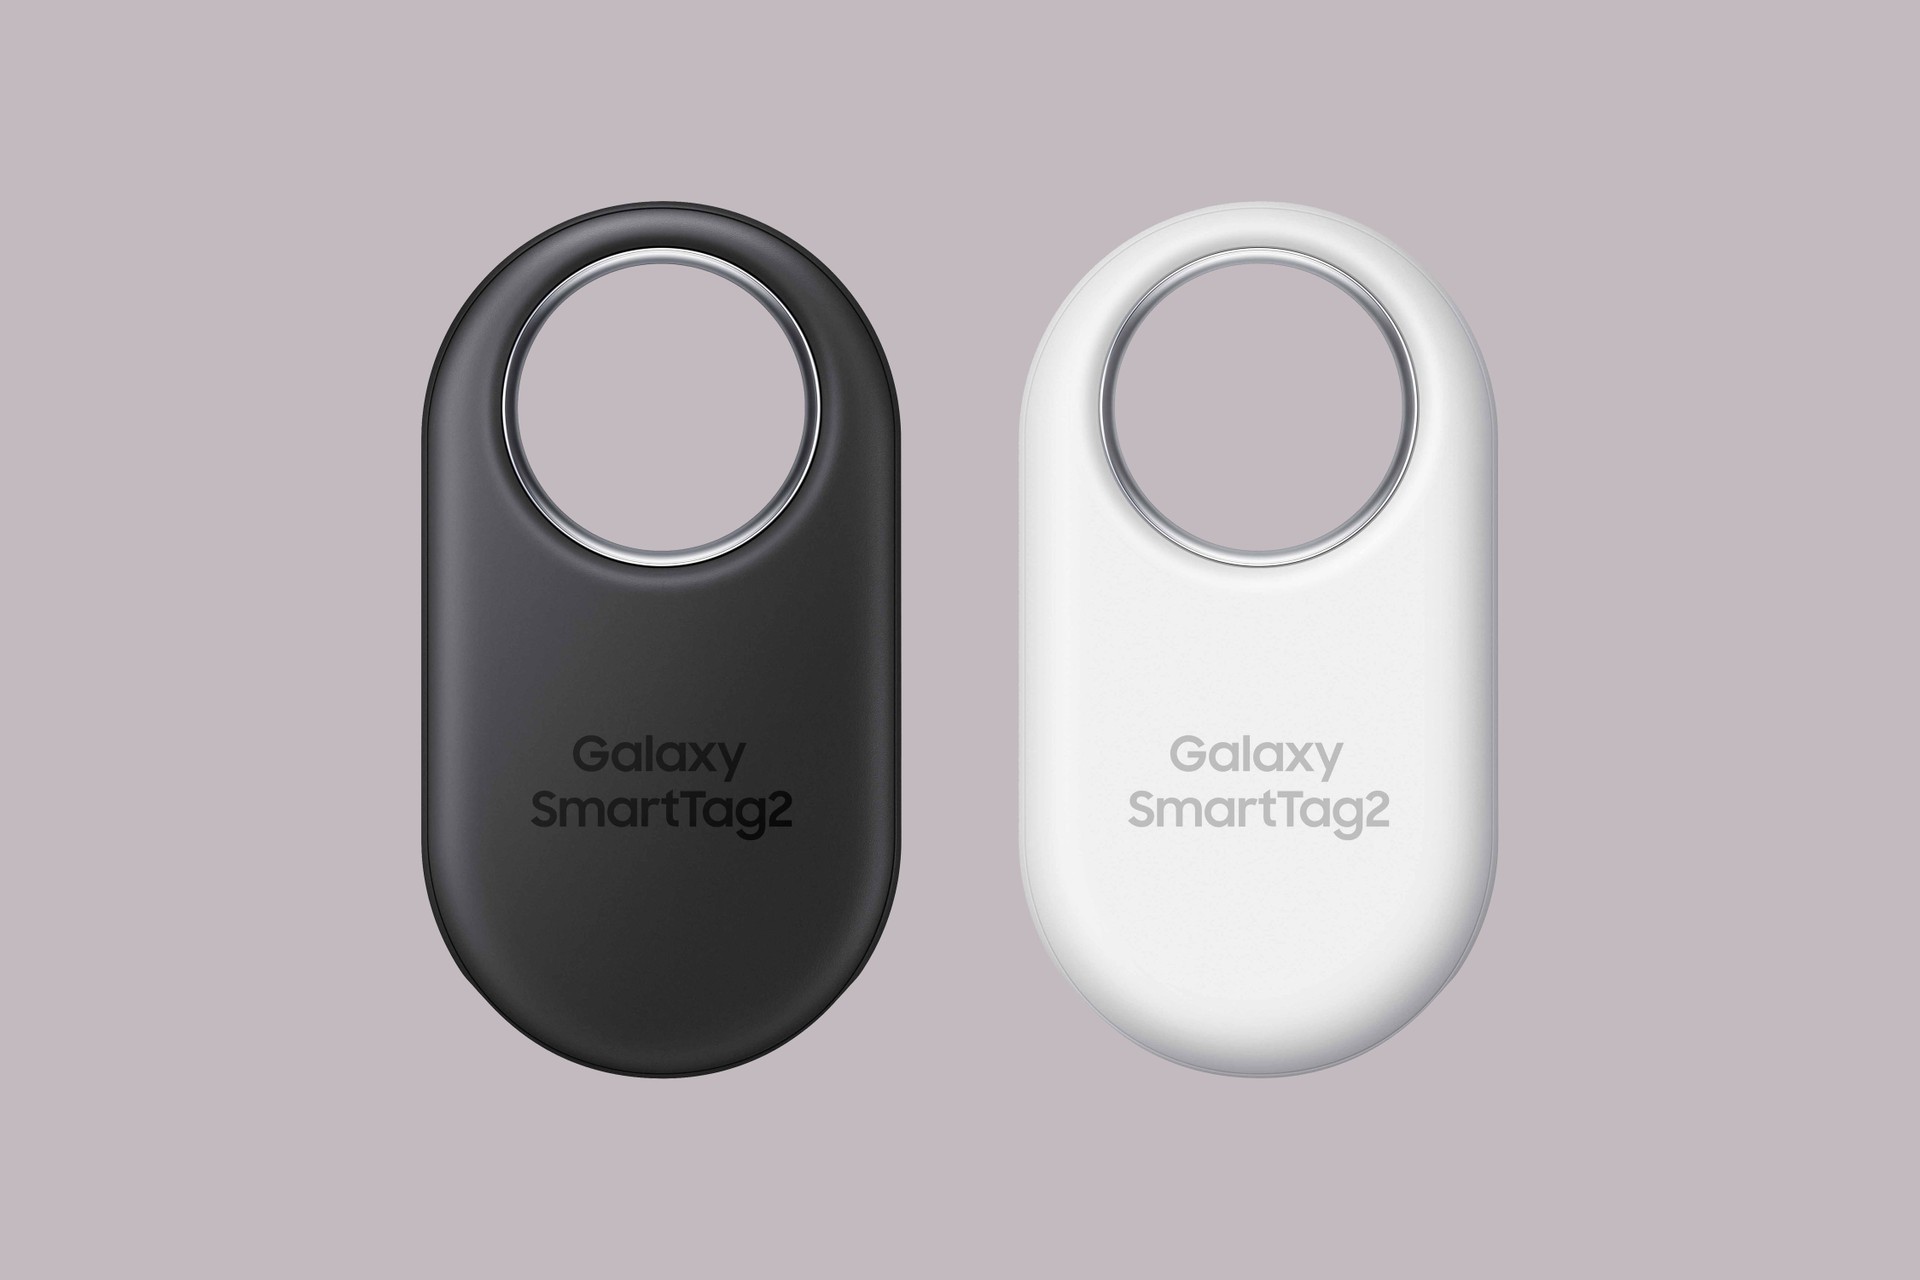 Samsung announces the Galaxy SmartTag 2 with a new, energy-efficient design, UWB and BLE